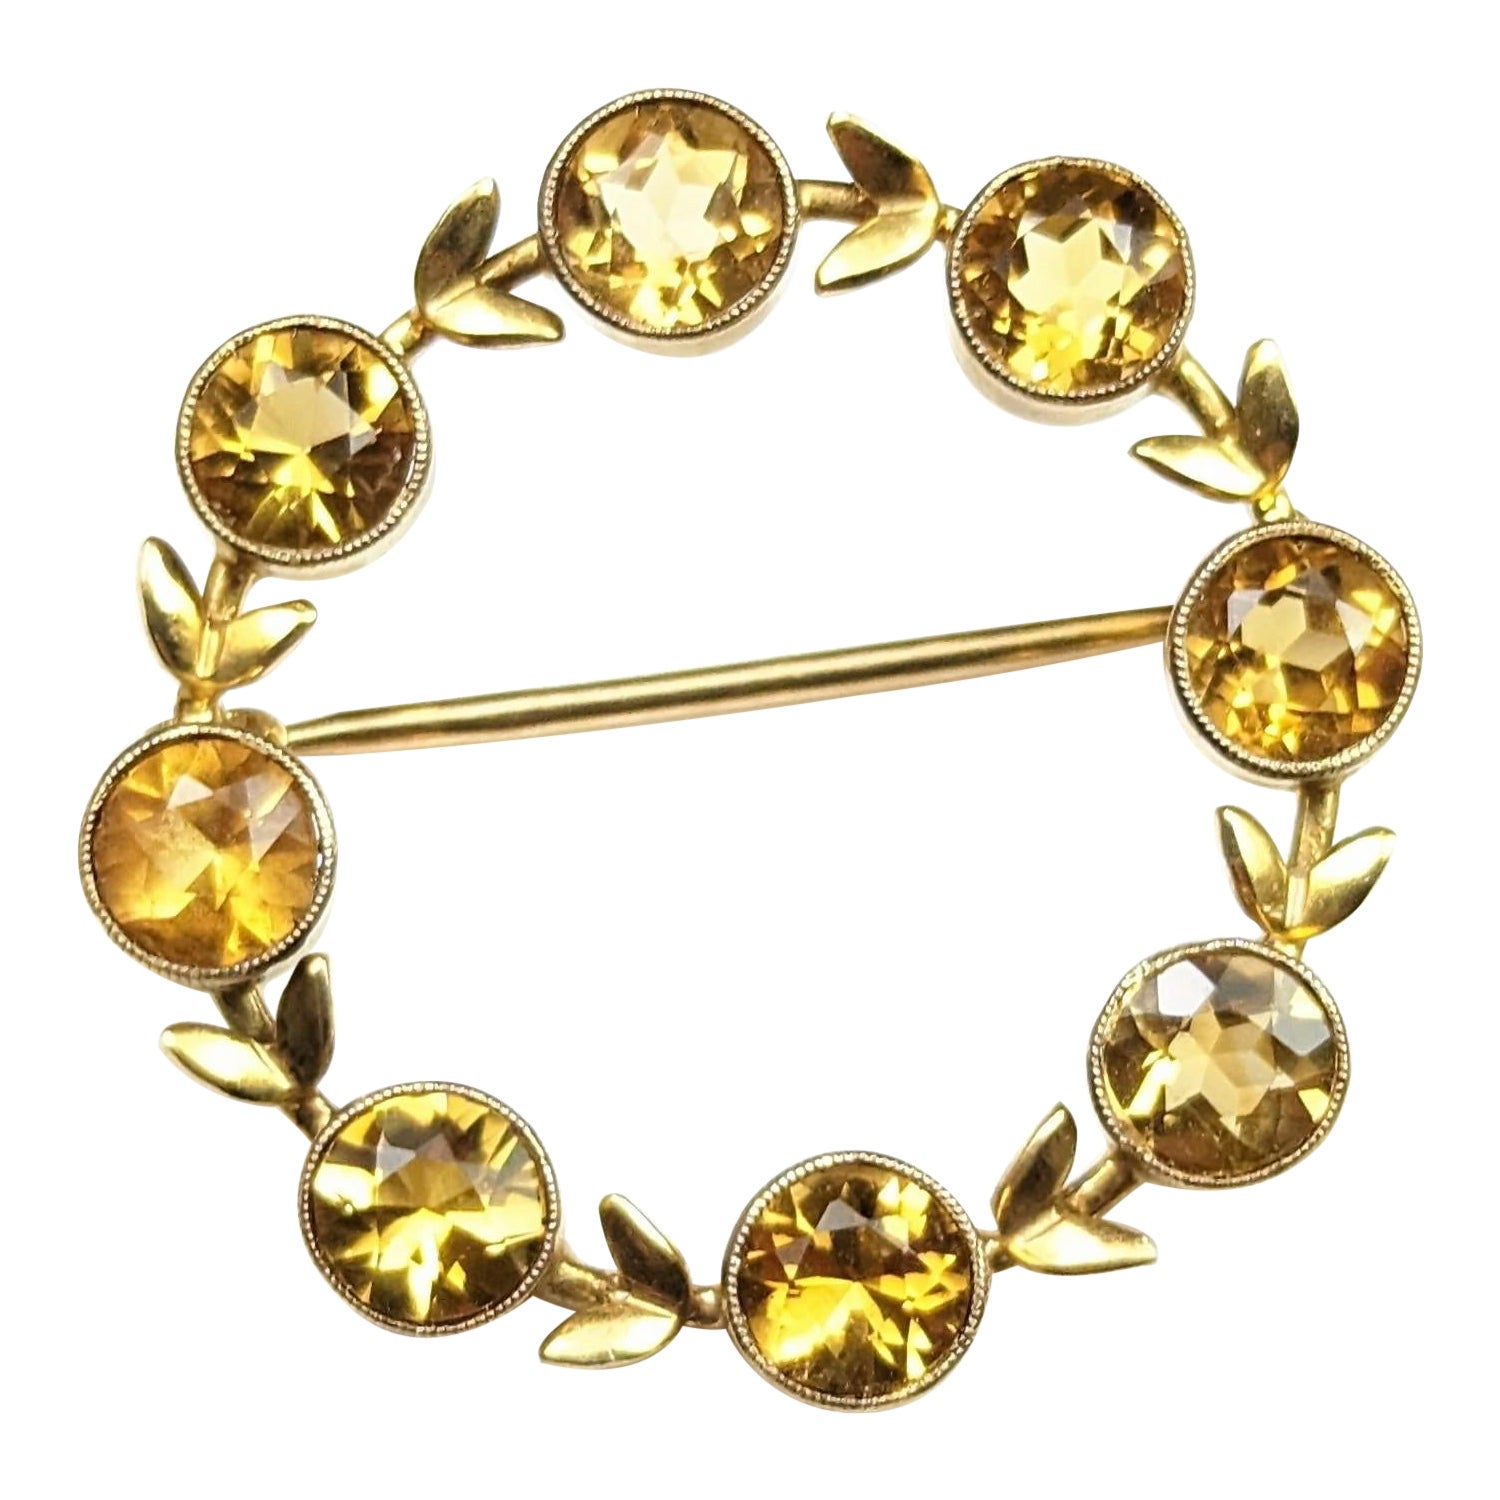 Vintage Citrine wreath brooch, 9k yellow gold, Cropp and Farr 